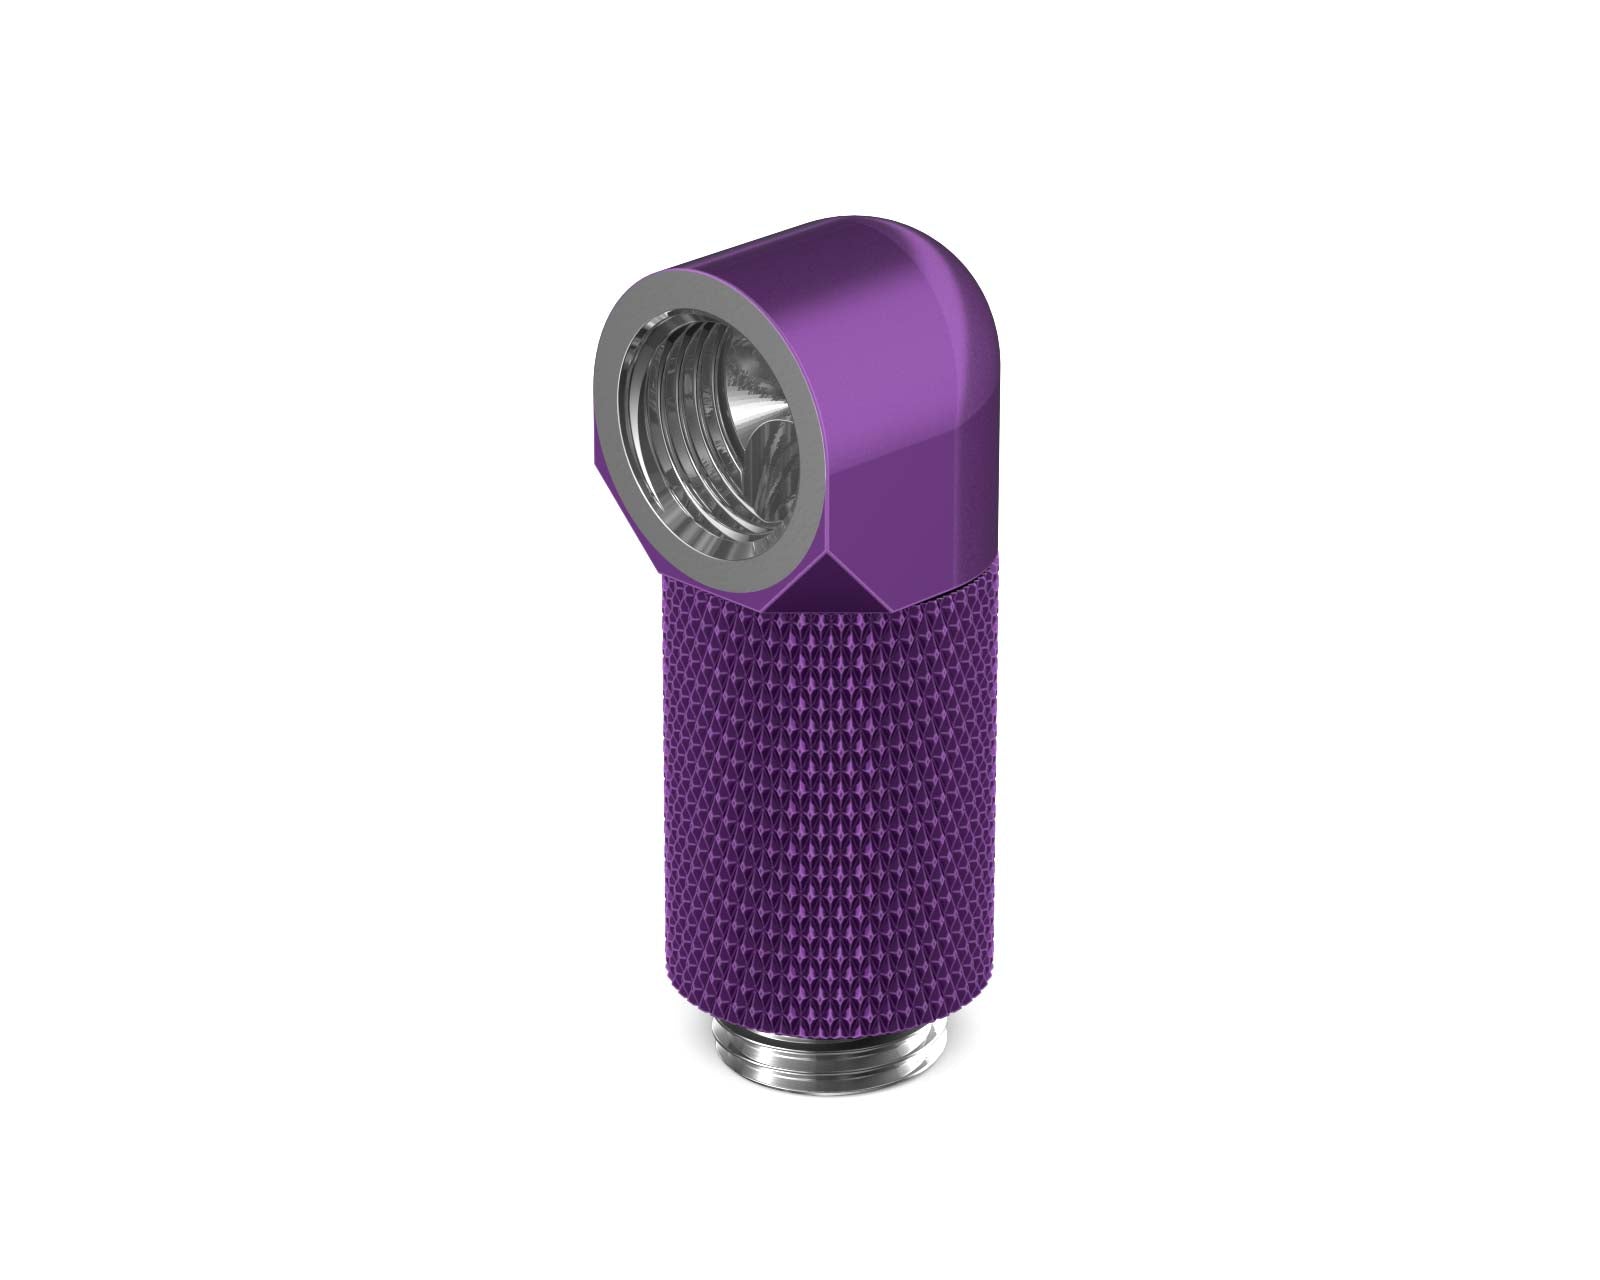 BSTOCK:PrimoChill Male to Female G 1/4in. 90 Degree SX Rotary 25mm Extension Elbow Fitting - Candy Purple - PrimoChill - KEEPING IT COOL